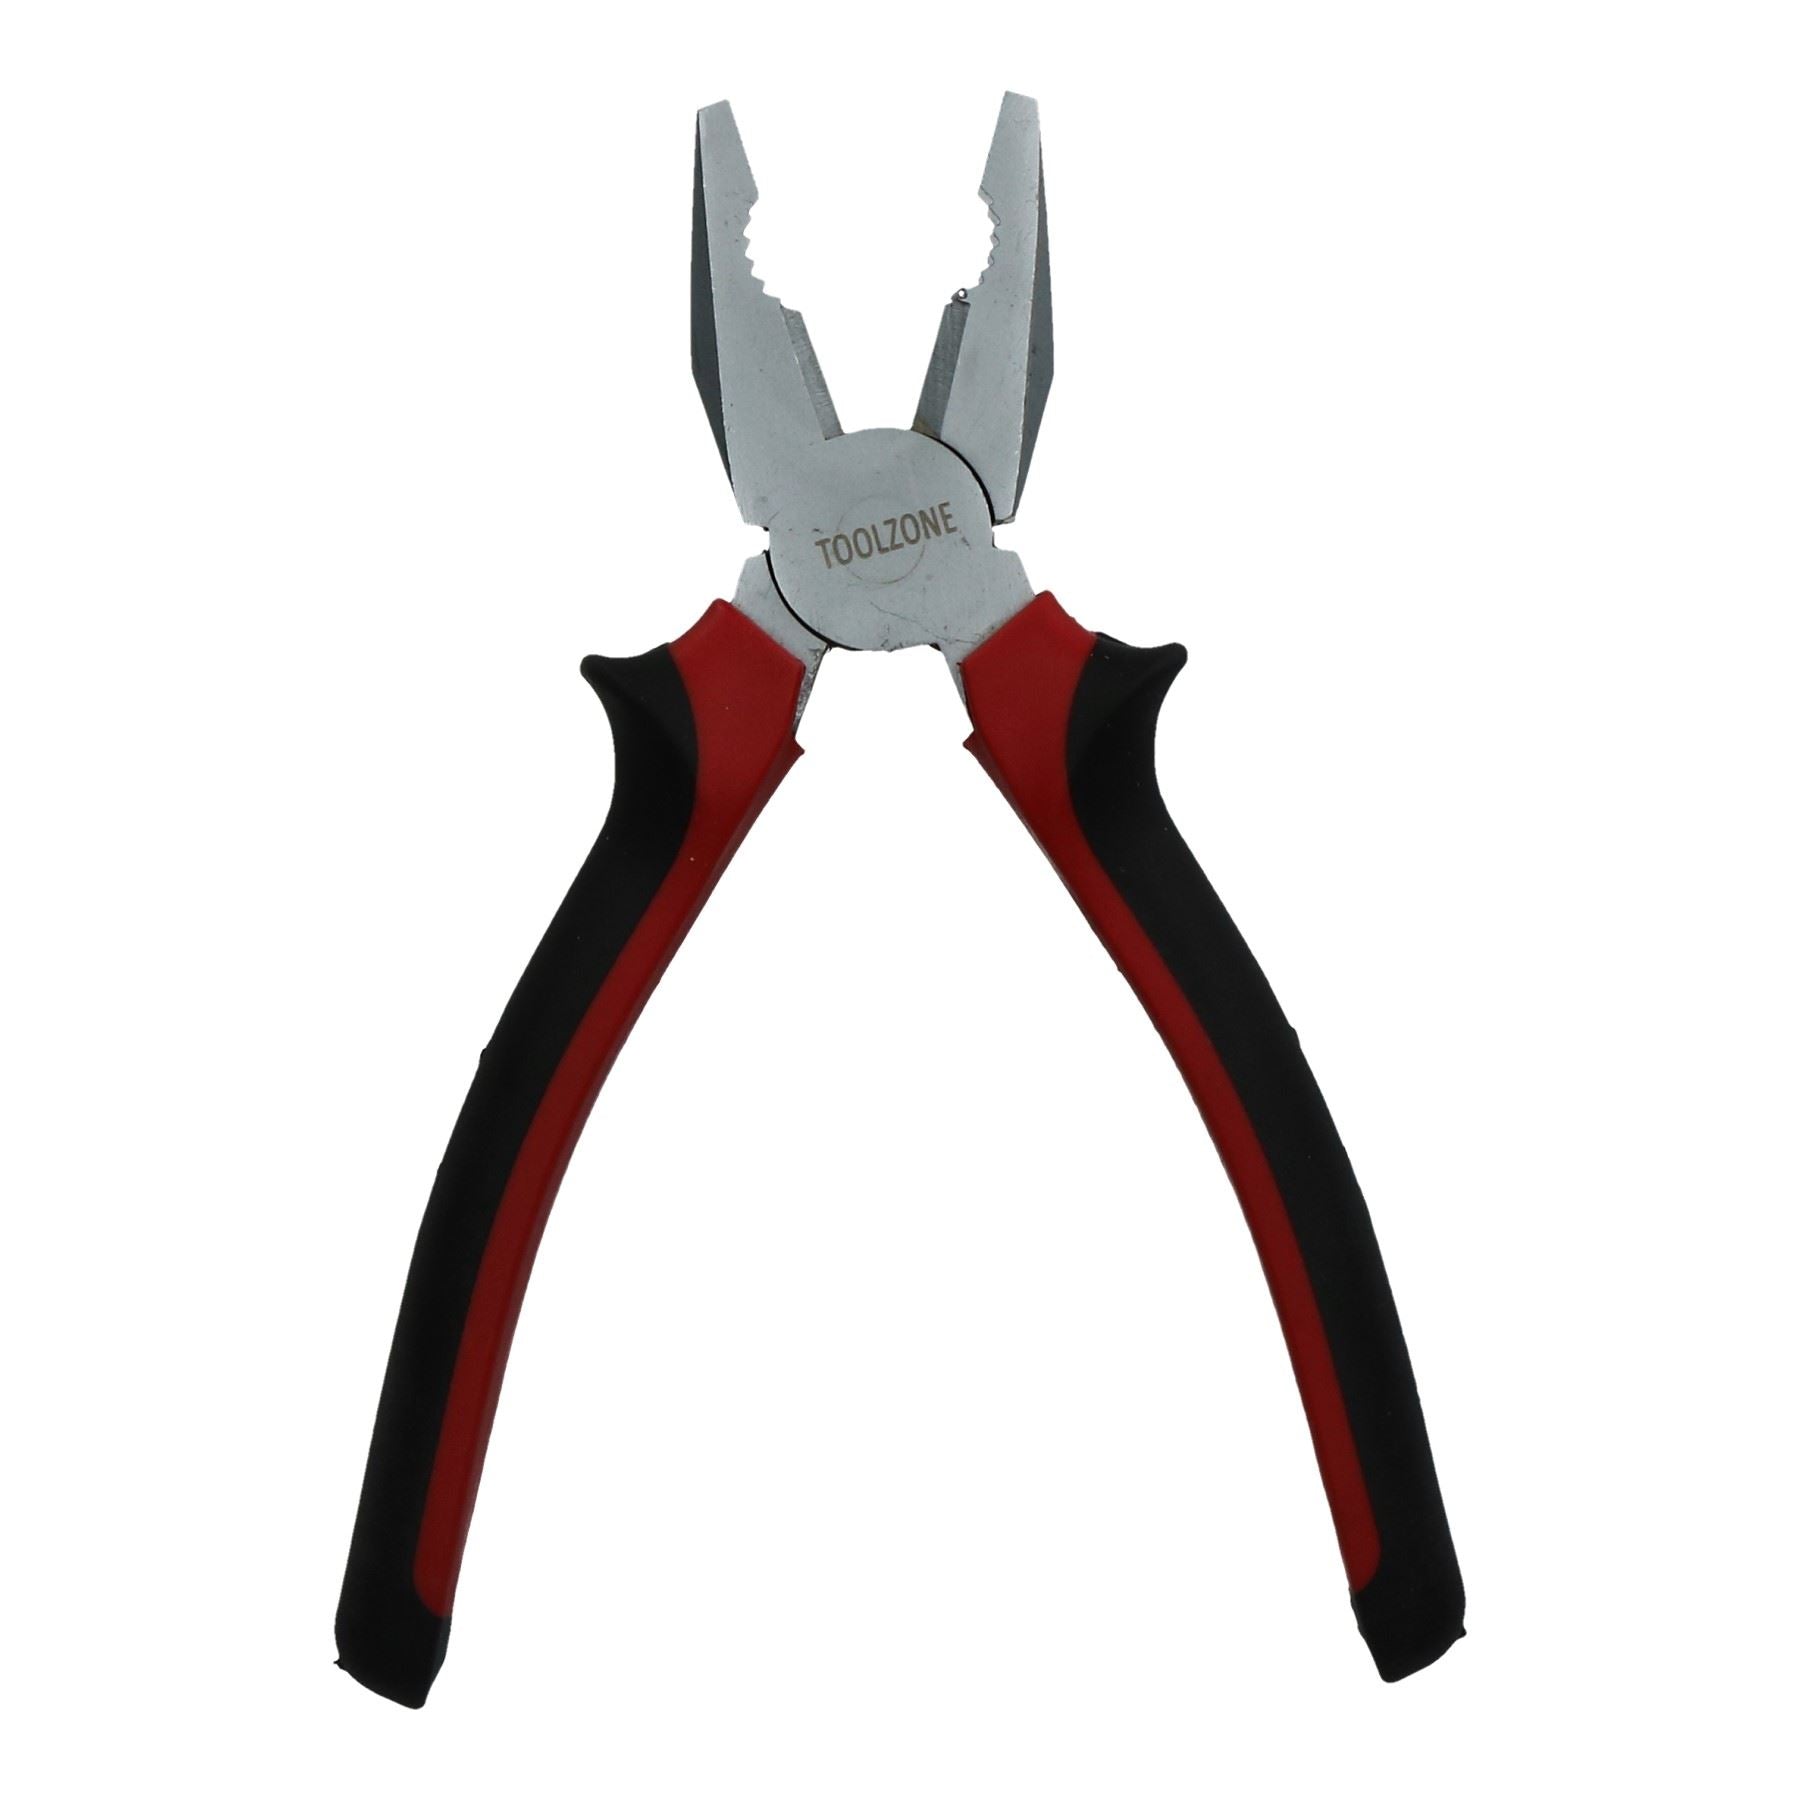 8" / 200mm Combination Combo Engineers Pliers Cutters With Soft Grip Handles